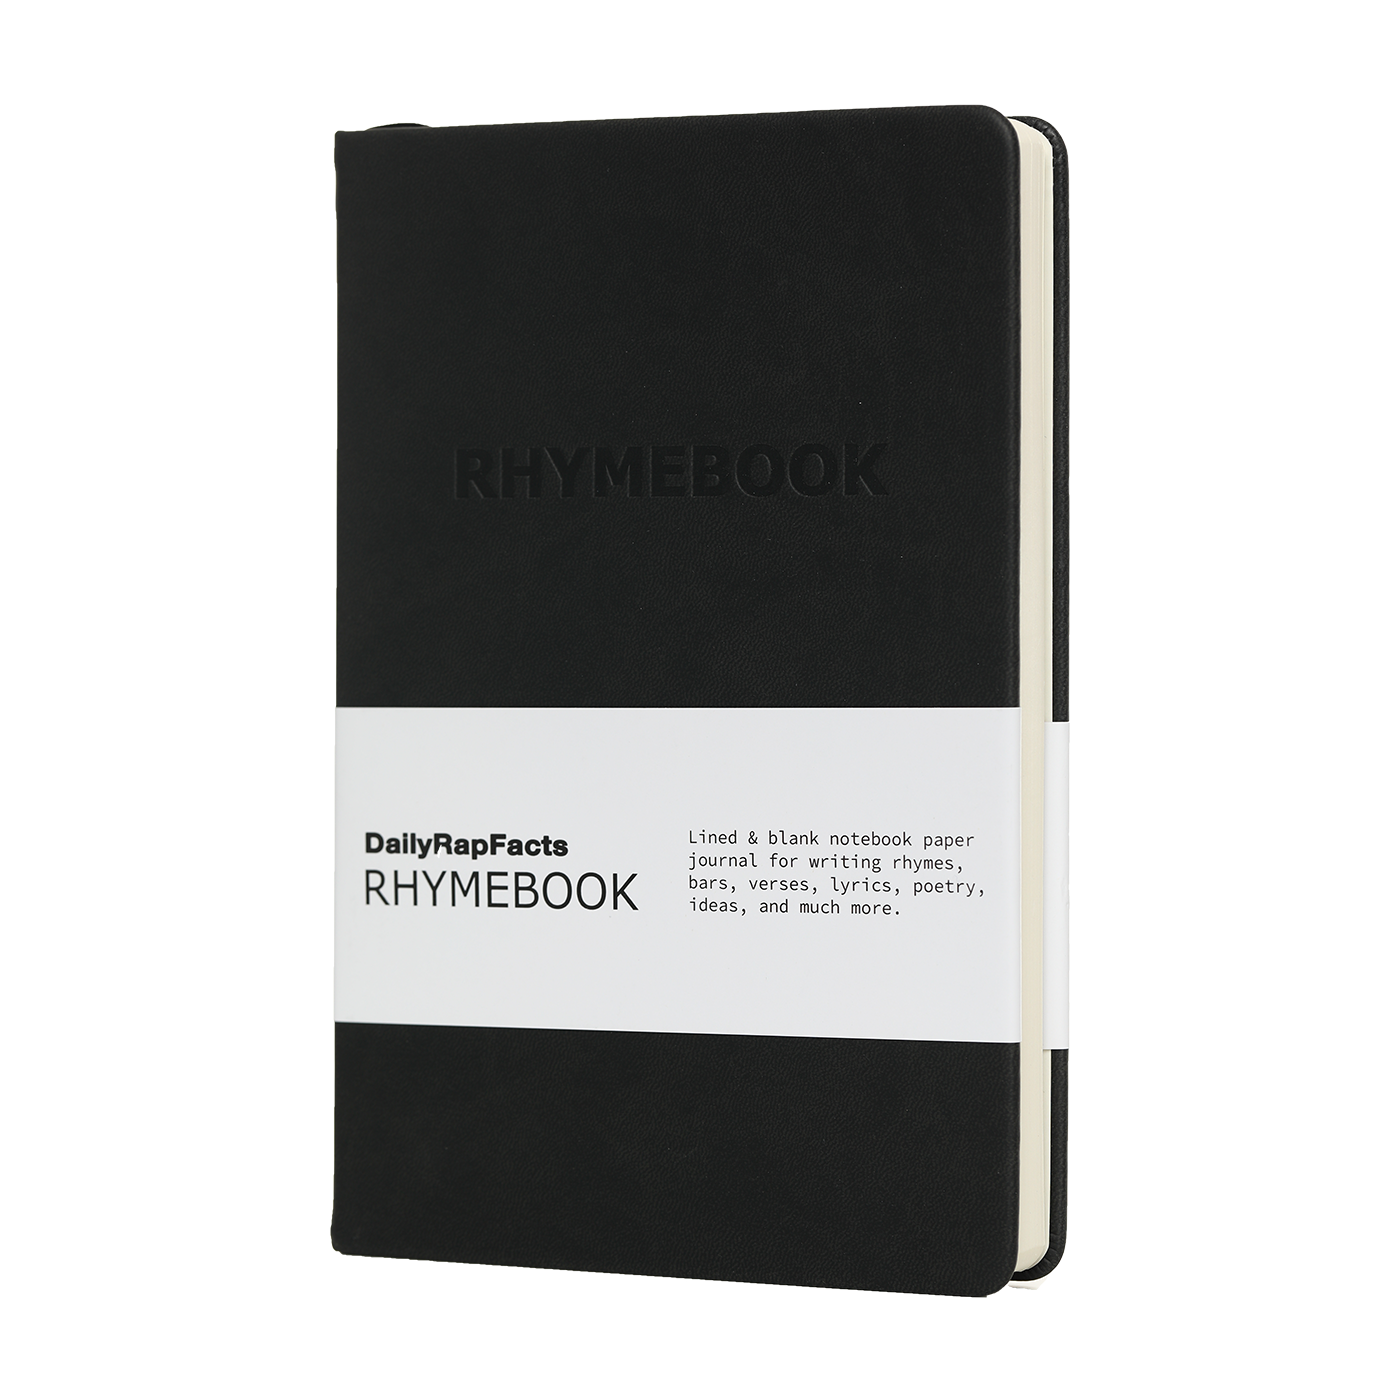 RHYME BOOK - Hardcover Lined & Blank Notebook Journal for Rhymes, Lyrics, Songwriting, Ideas, & more